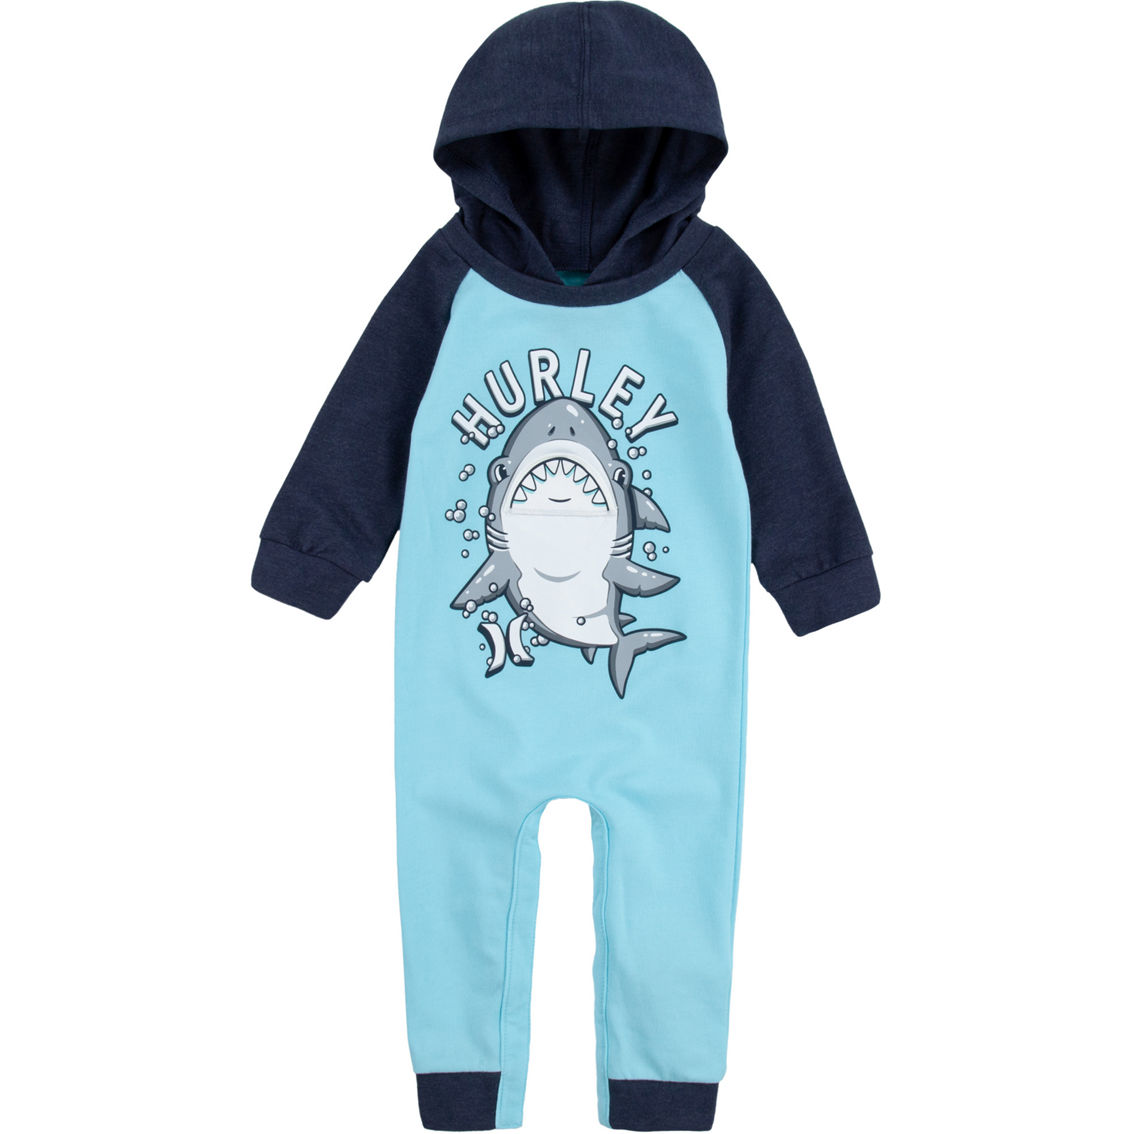 Hurley Baby Boy's Sharkbait Hooded Coverall | Baby Boy 0-24 Months ...